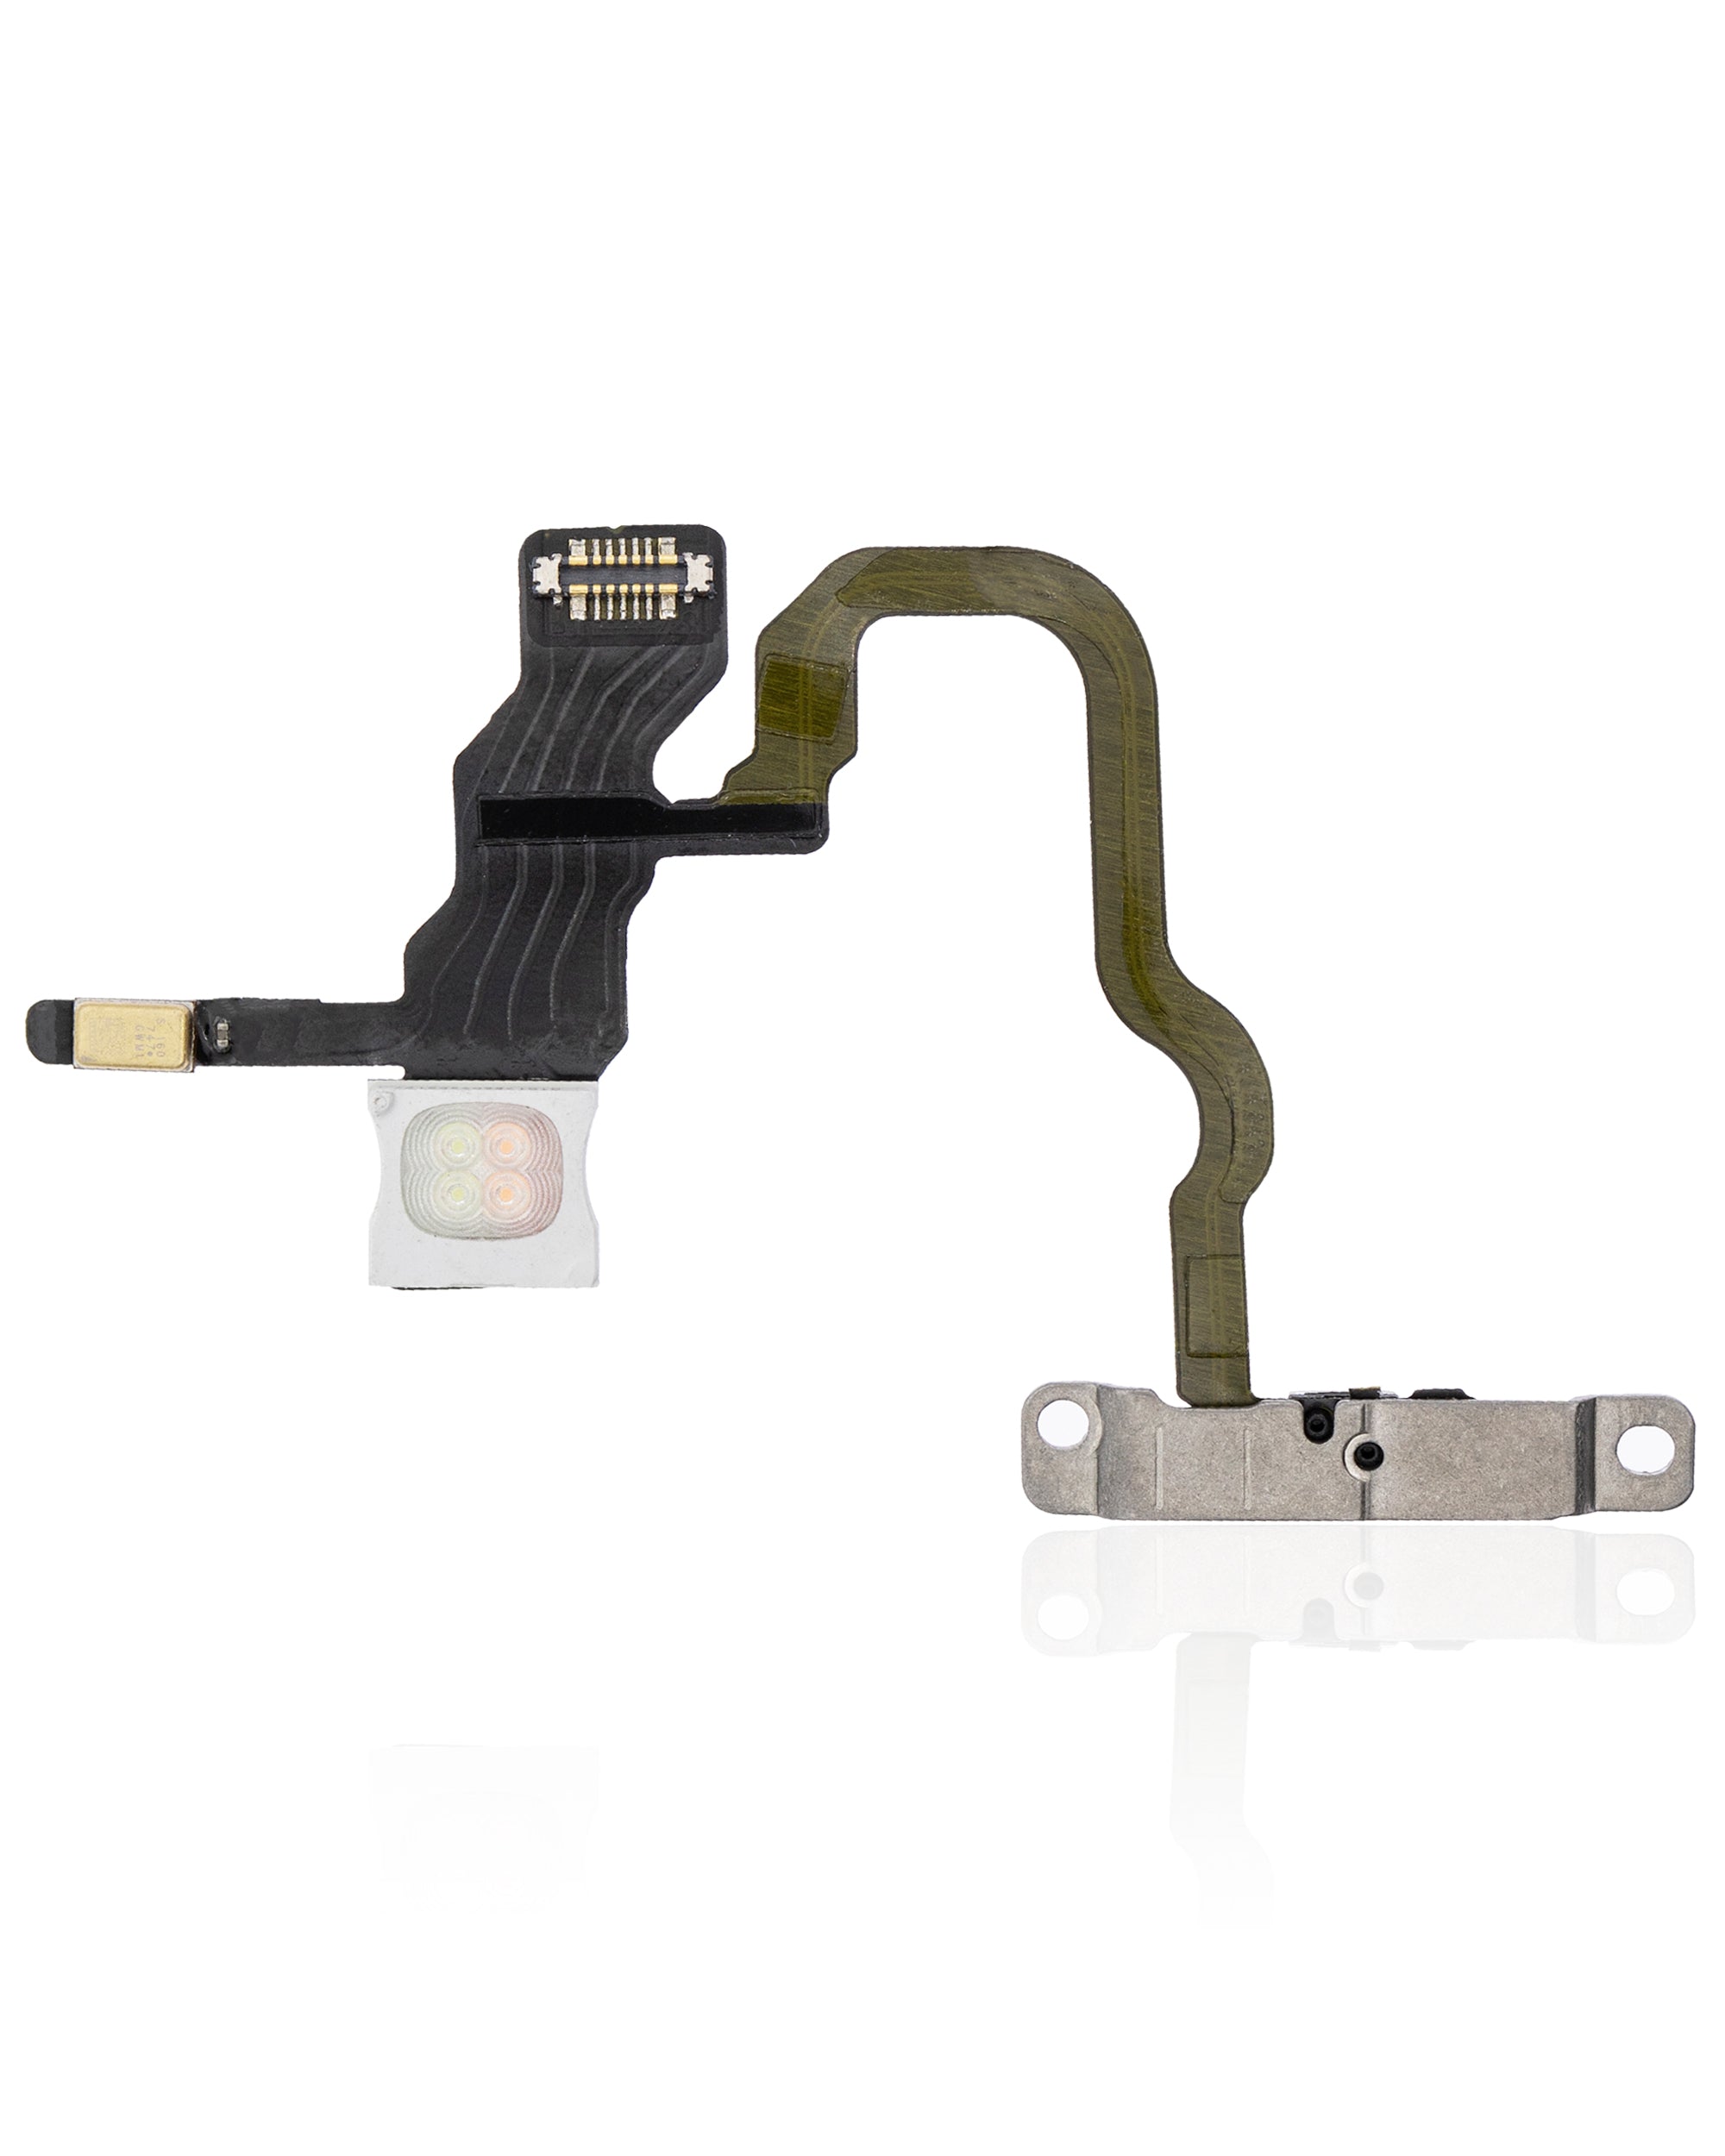 For iPhone X Power Button Flex Cable Replacement